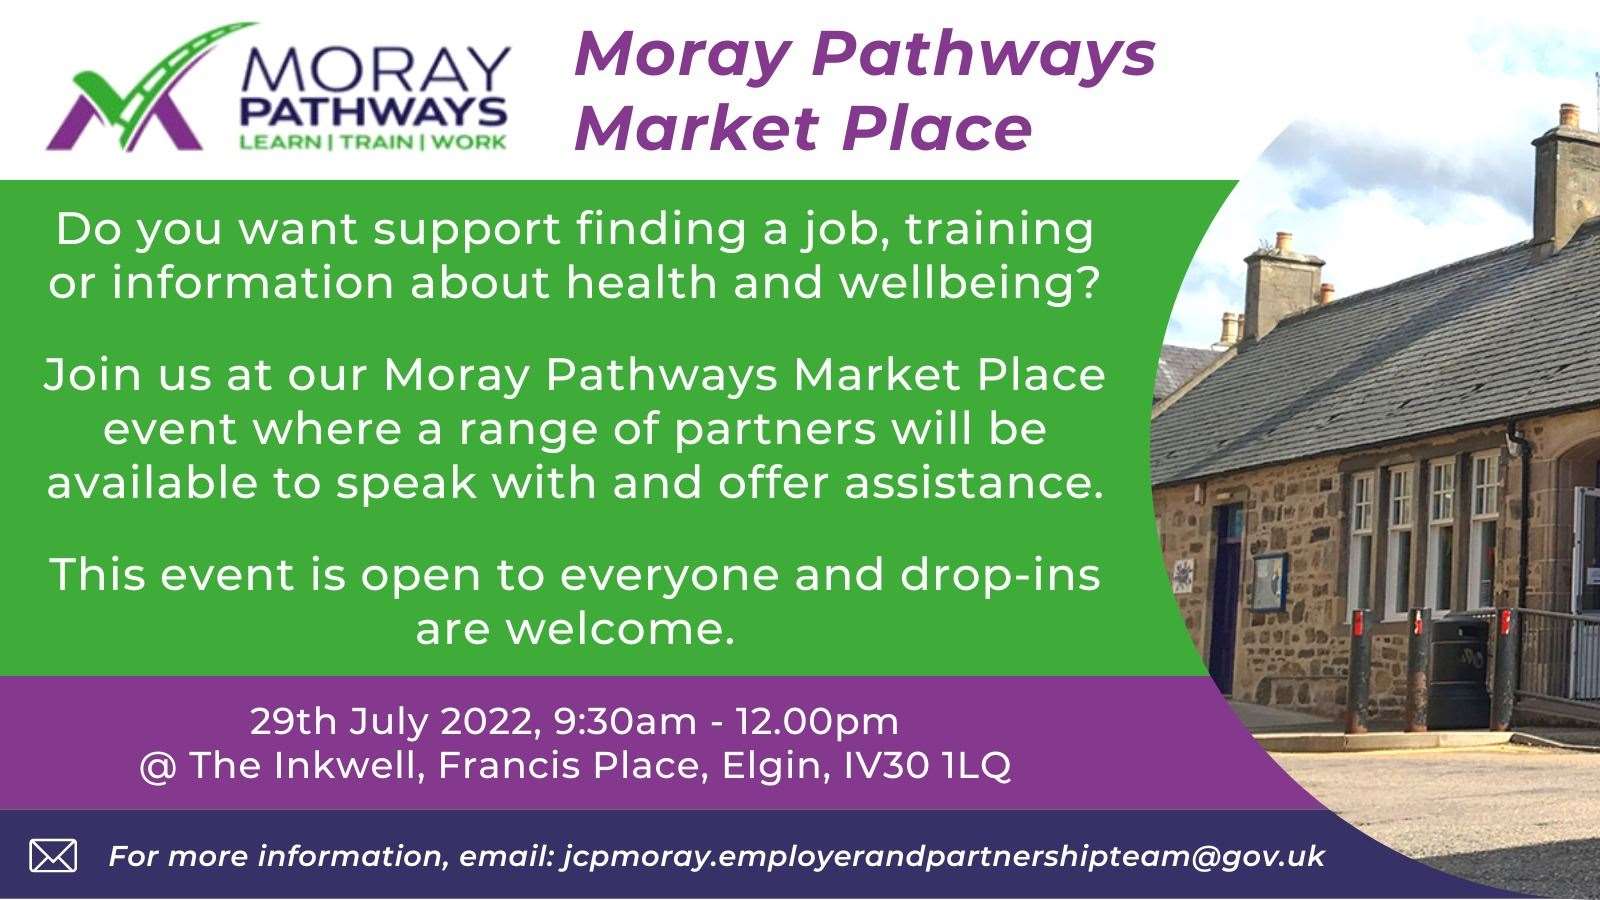 The next Moray Pathways Marketplace is due on July 29.